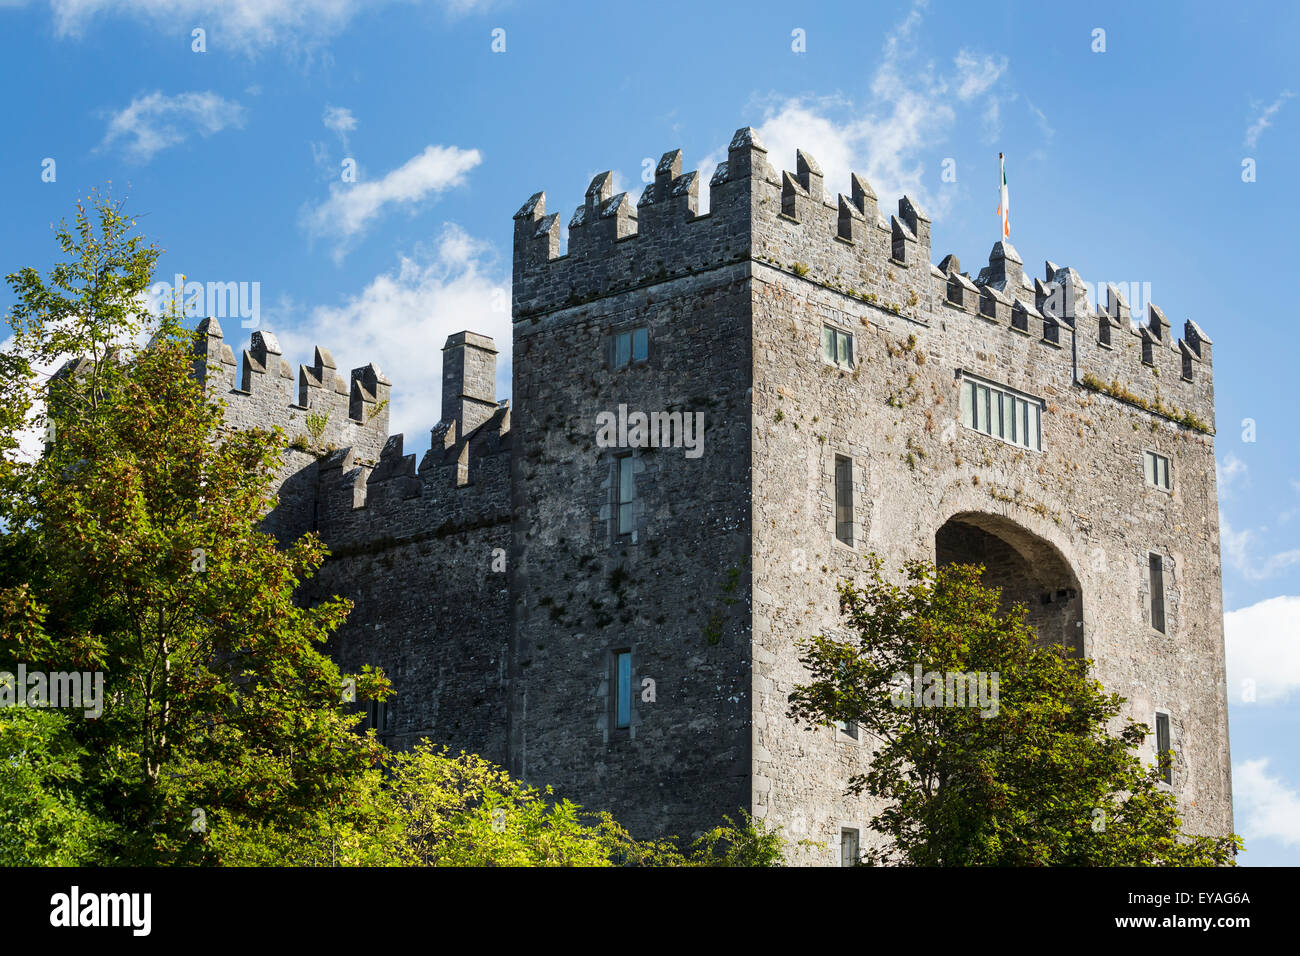 Stone castle with trees, blue sky and clouds; Bunratty, County Clare, Ireland Stock Photo